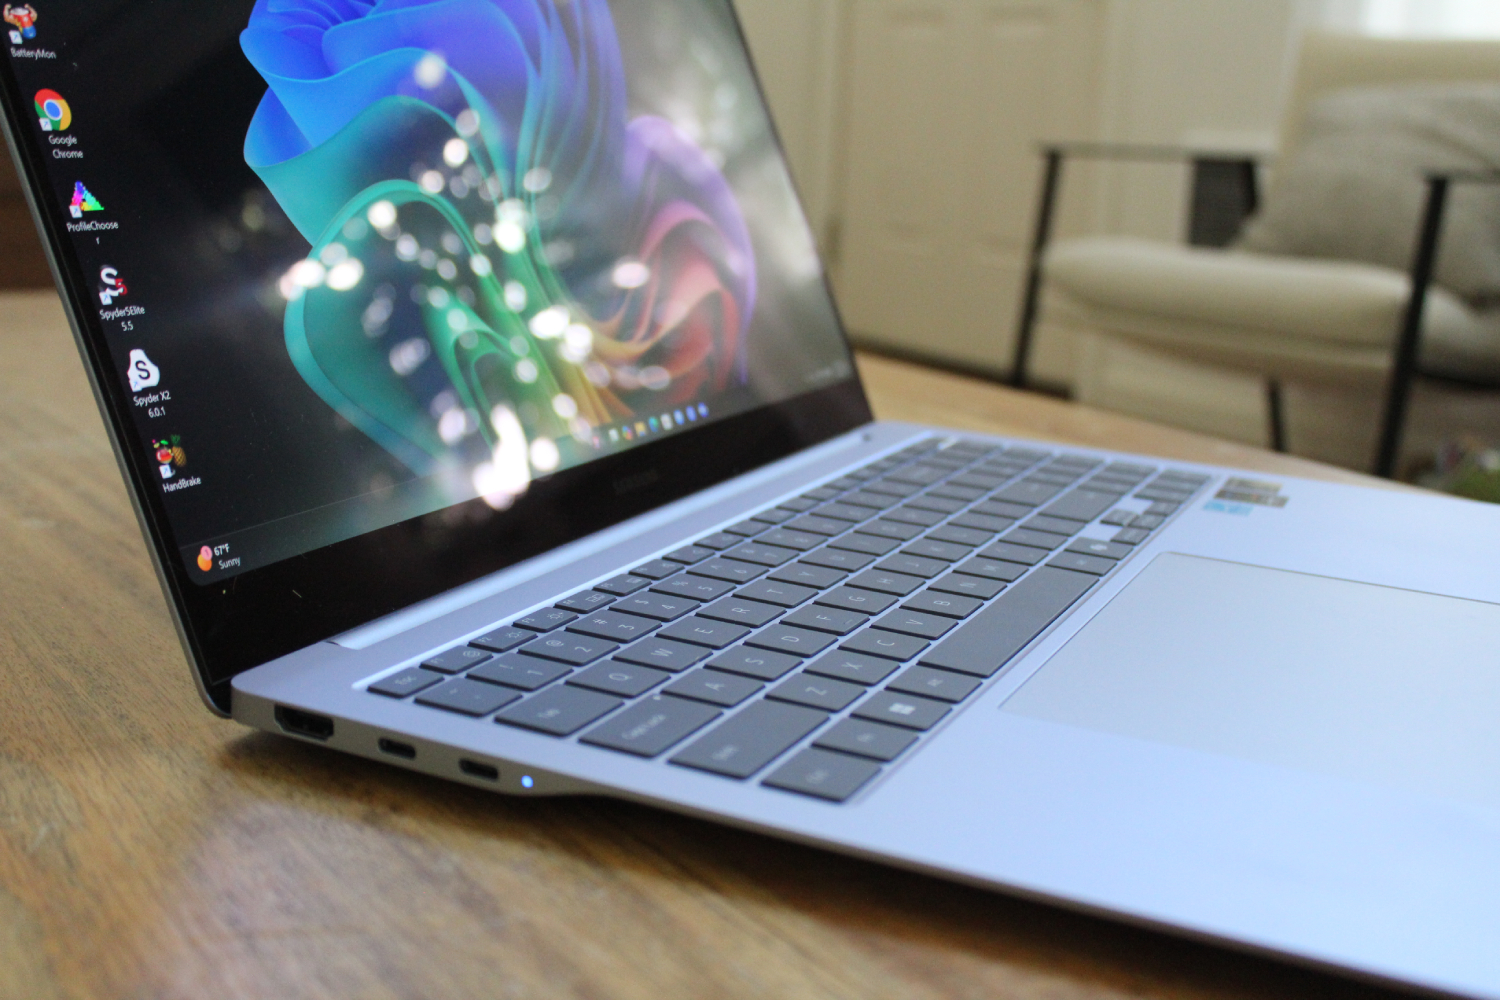 The keyboard and side profile of the Galaxy Book4 Edge.